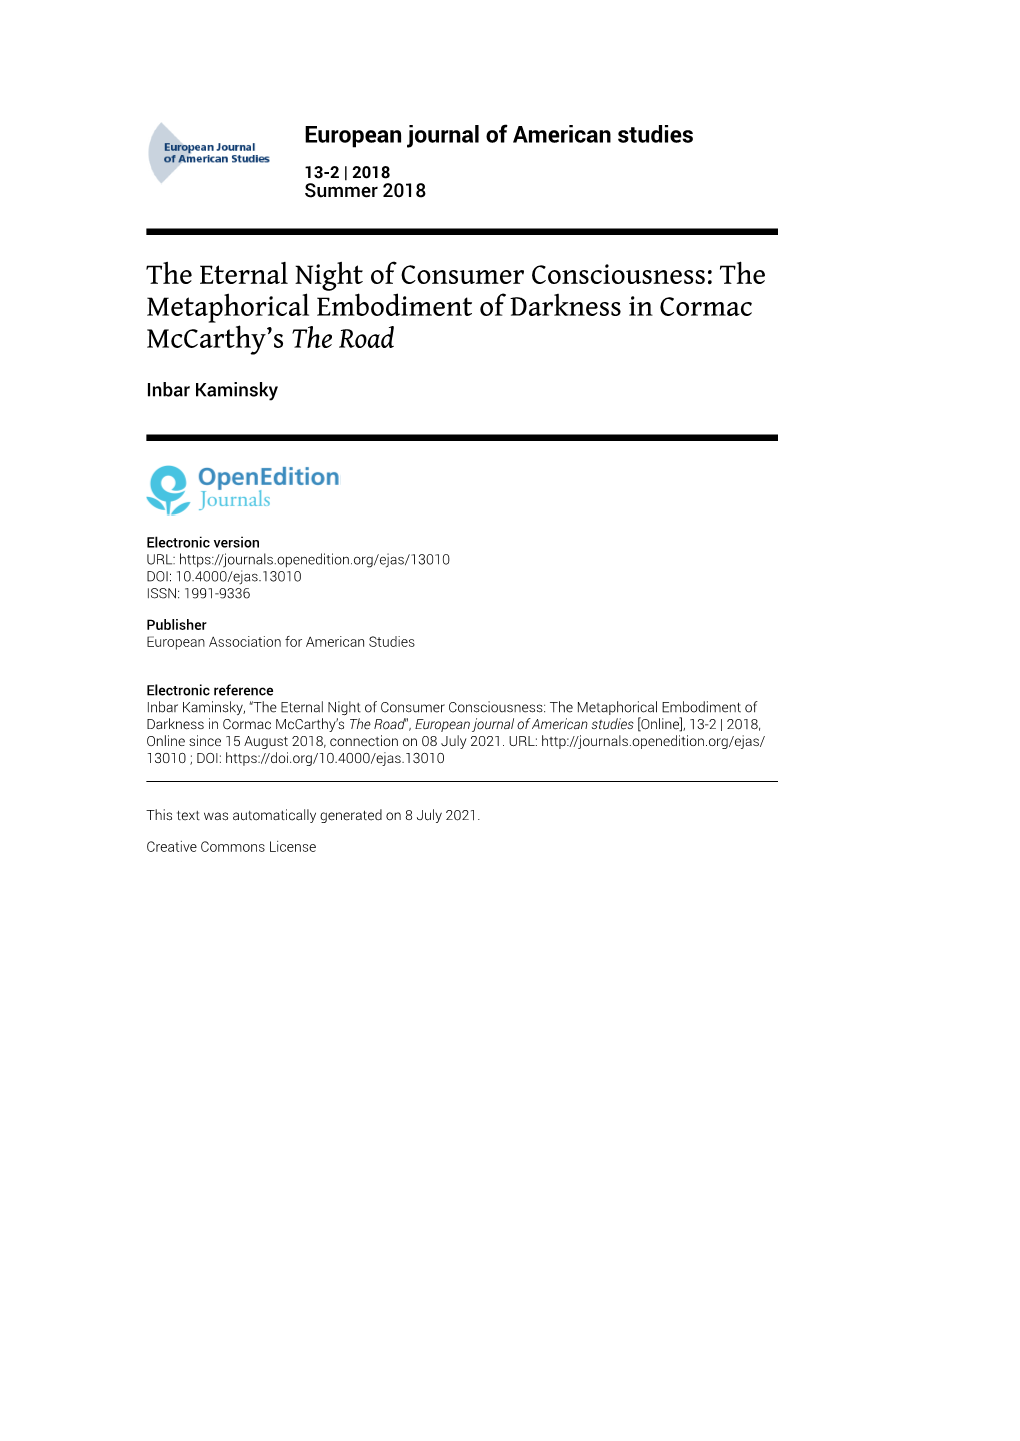 European Journal of American Studies, 13-2 | 2018 the Eternal Night of Consumer Consciousness: the Metaphorical Embodiment of D